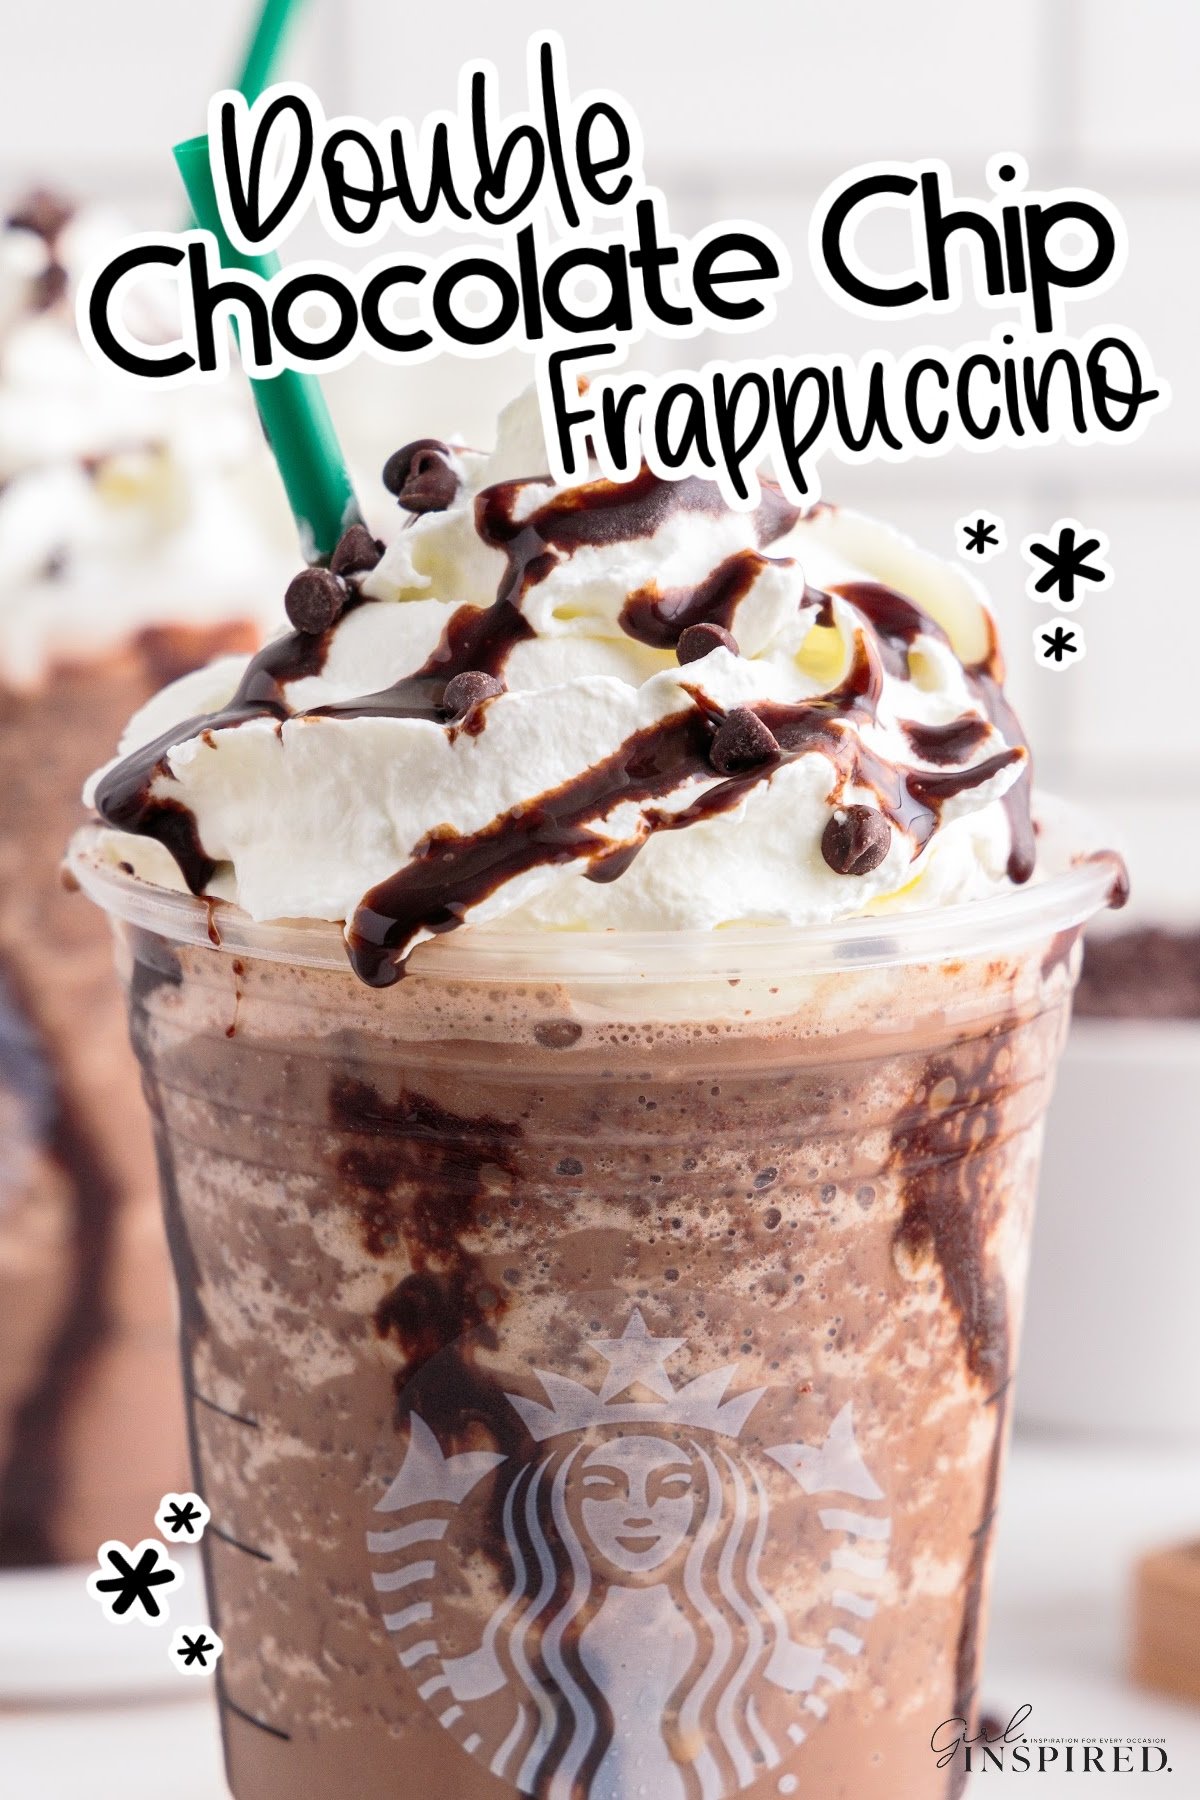 Two homemade double chocolate chip frappuccinos in Starbucks cups with whipped cream, chocolate drizzle and mini chocolate chips on top.